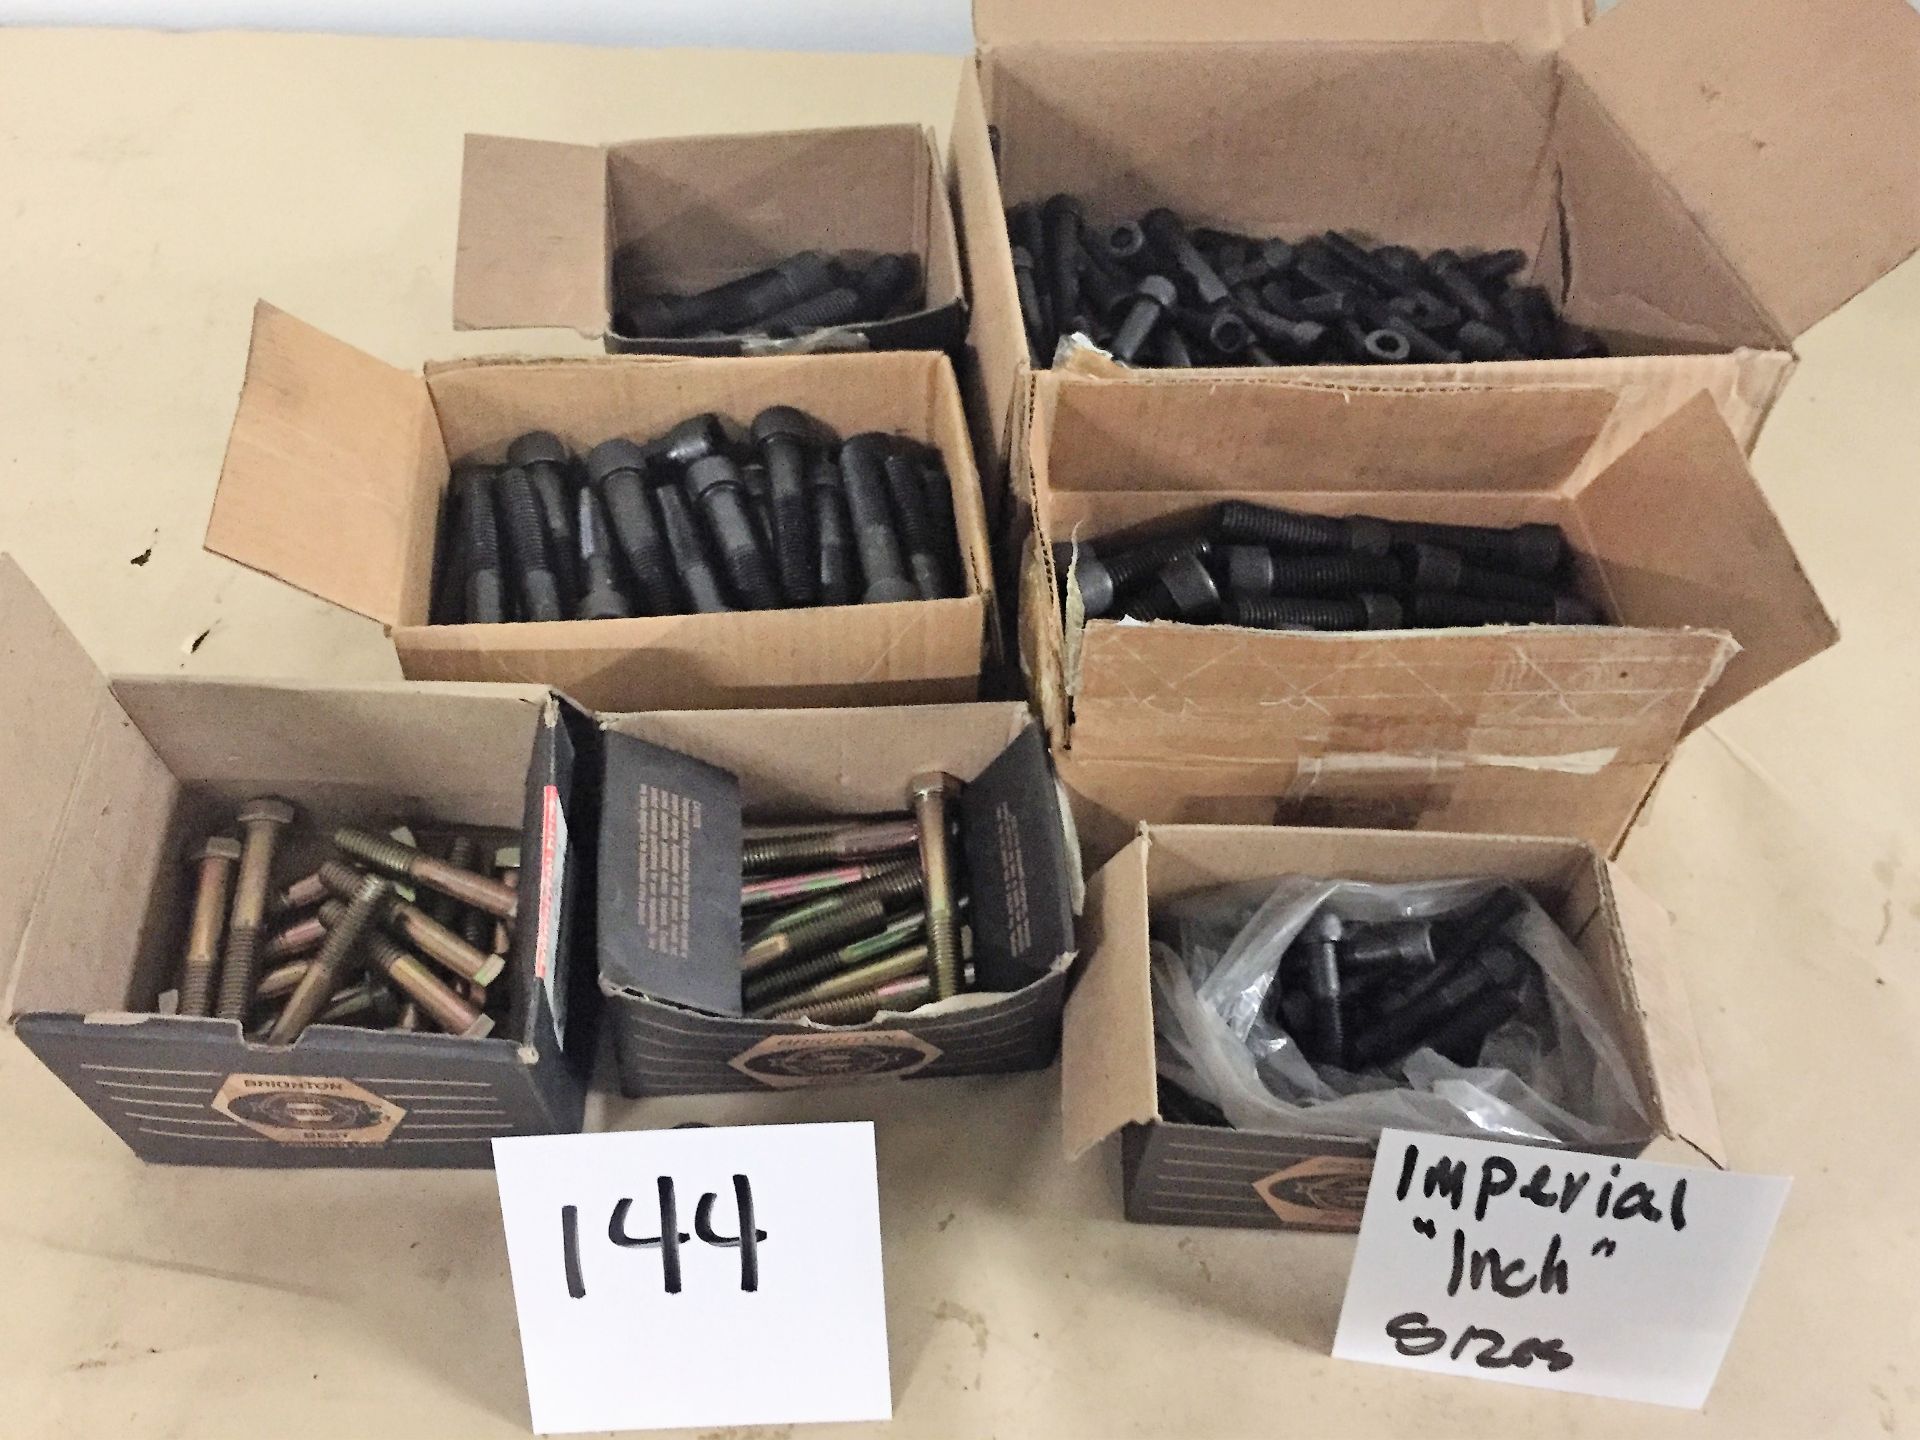 Assortment of Bolts, Imperial Inch Sizes